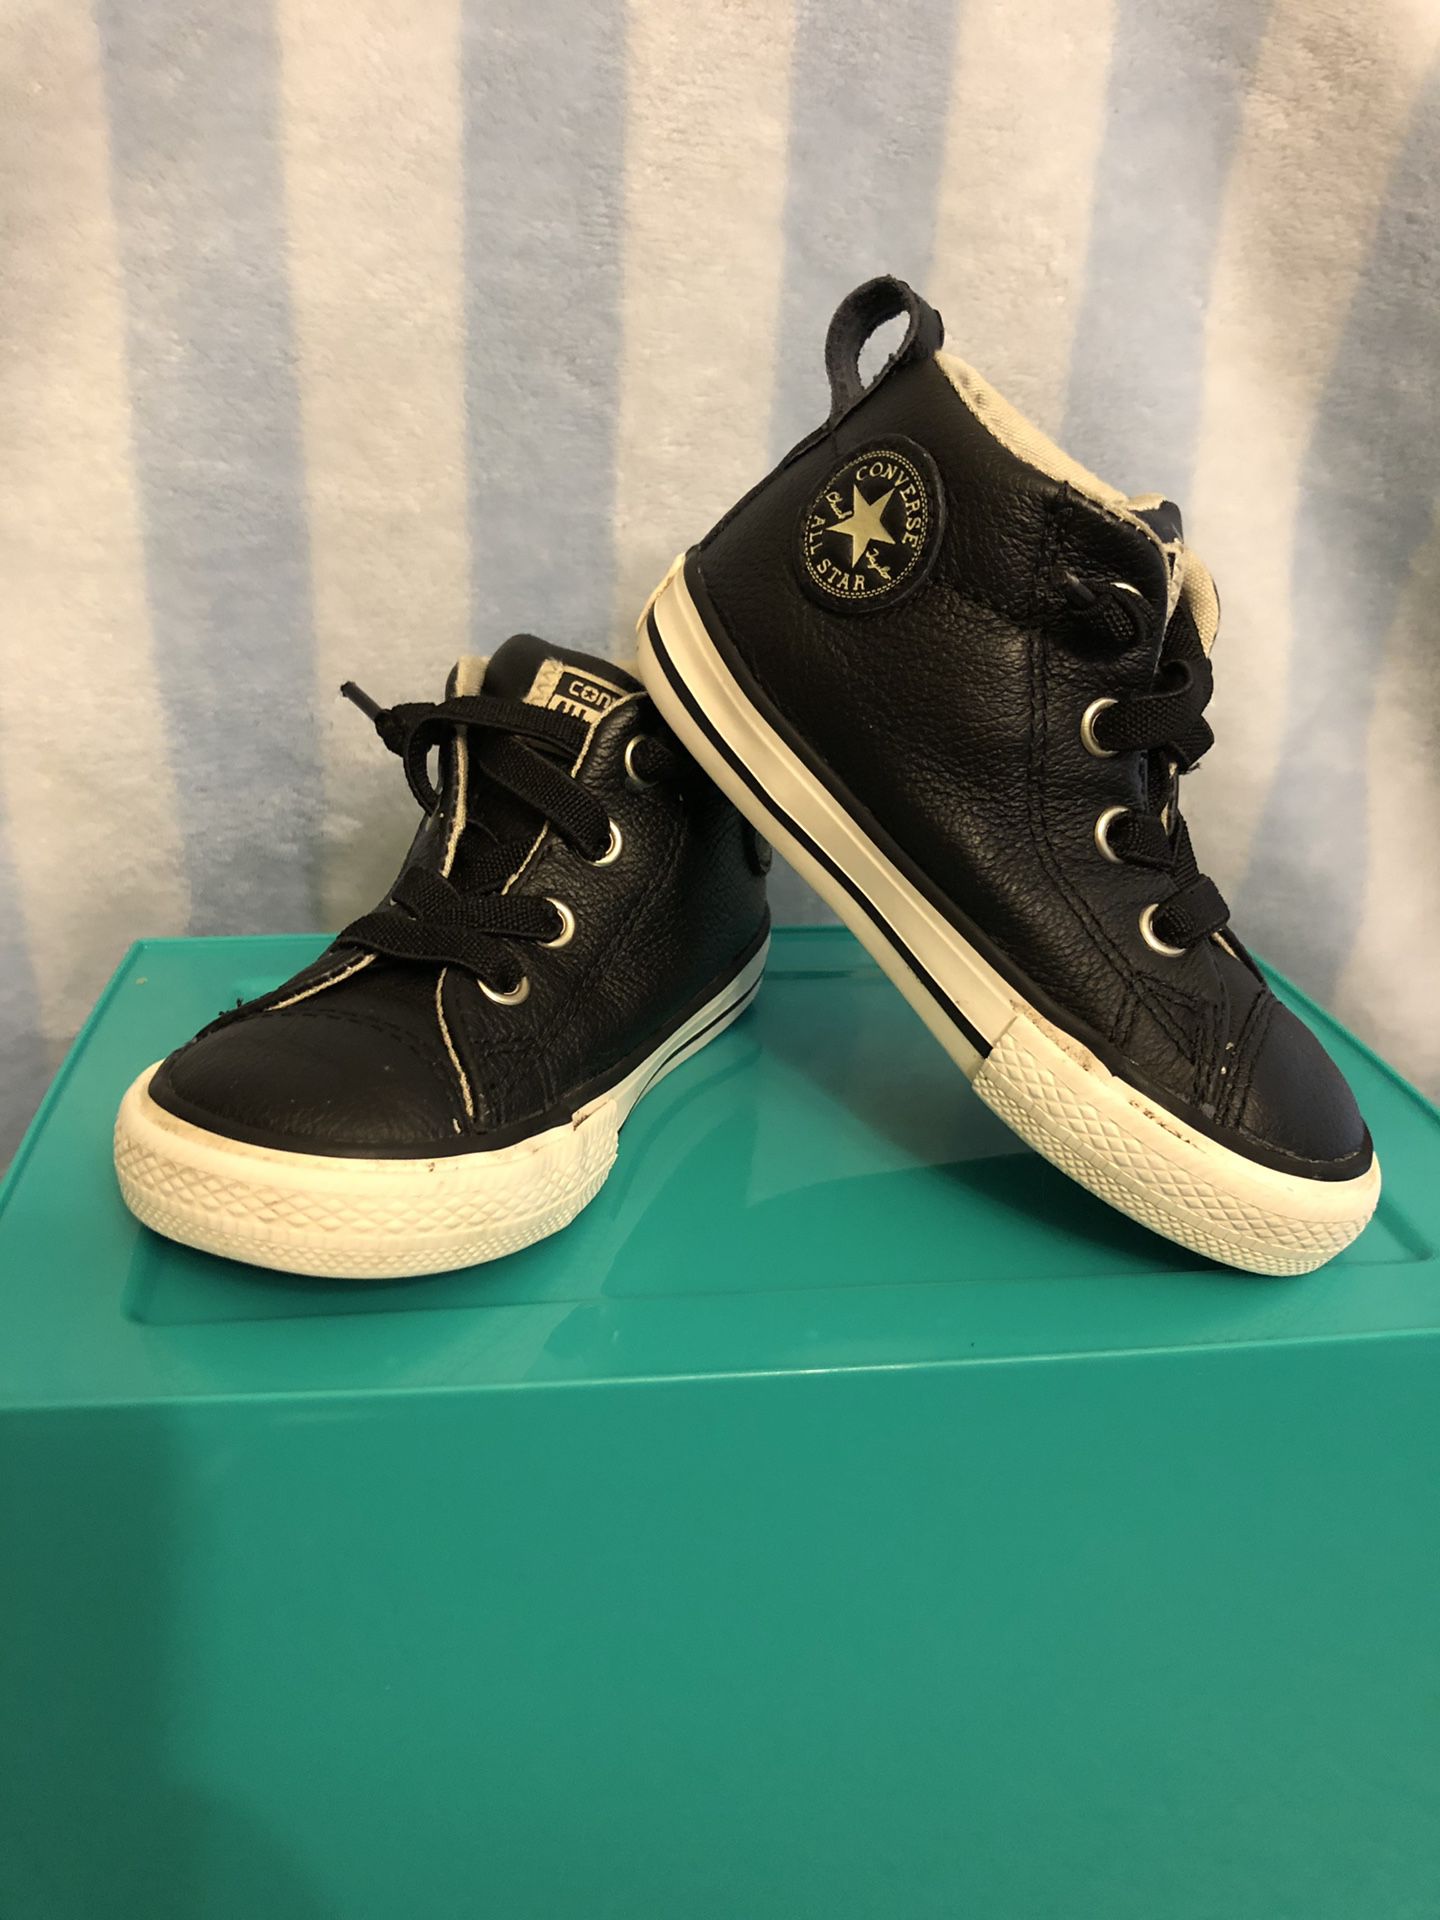 Size 6c black leather toddler converse.